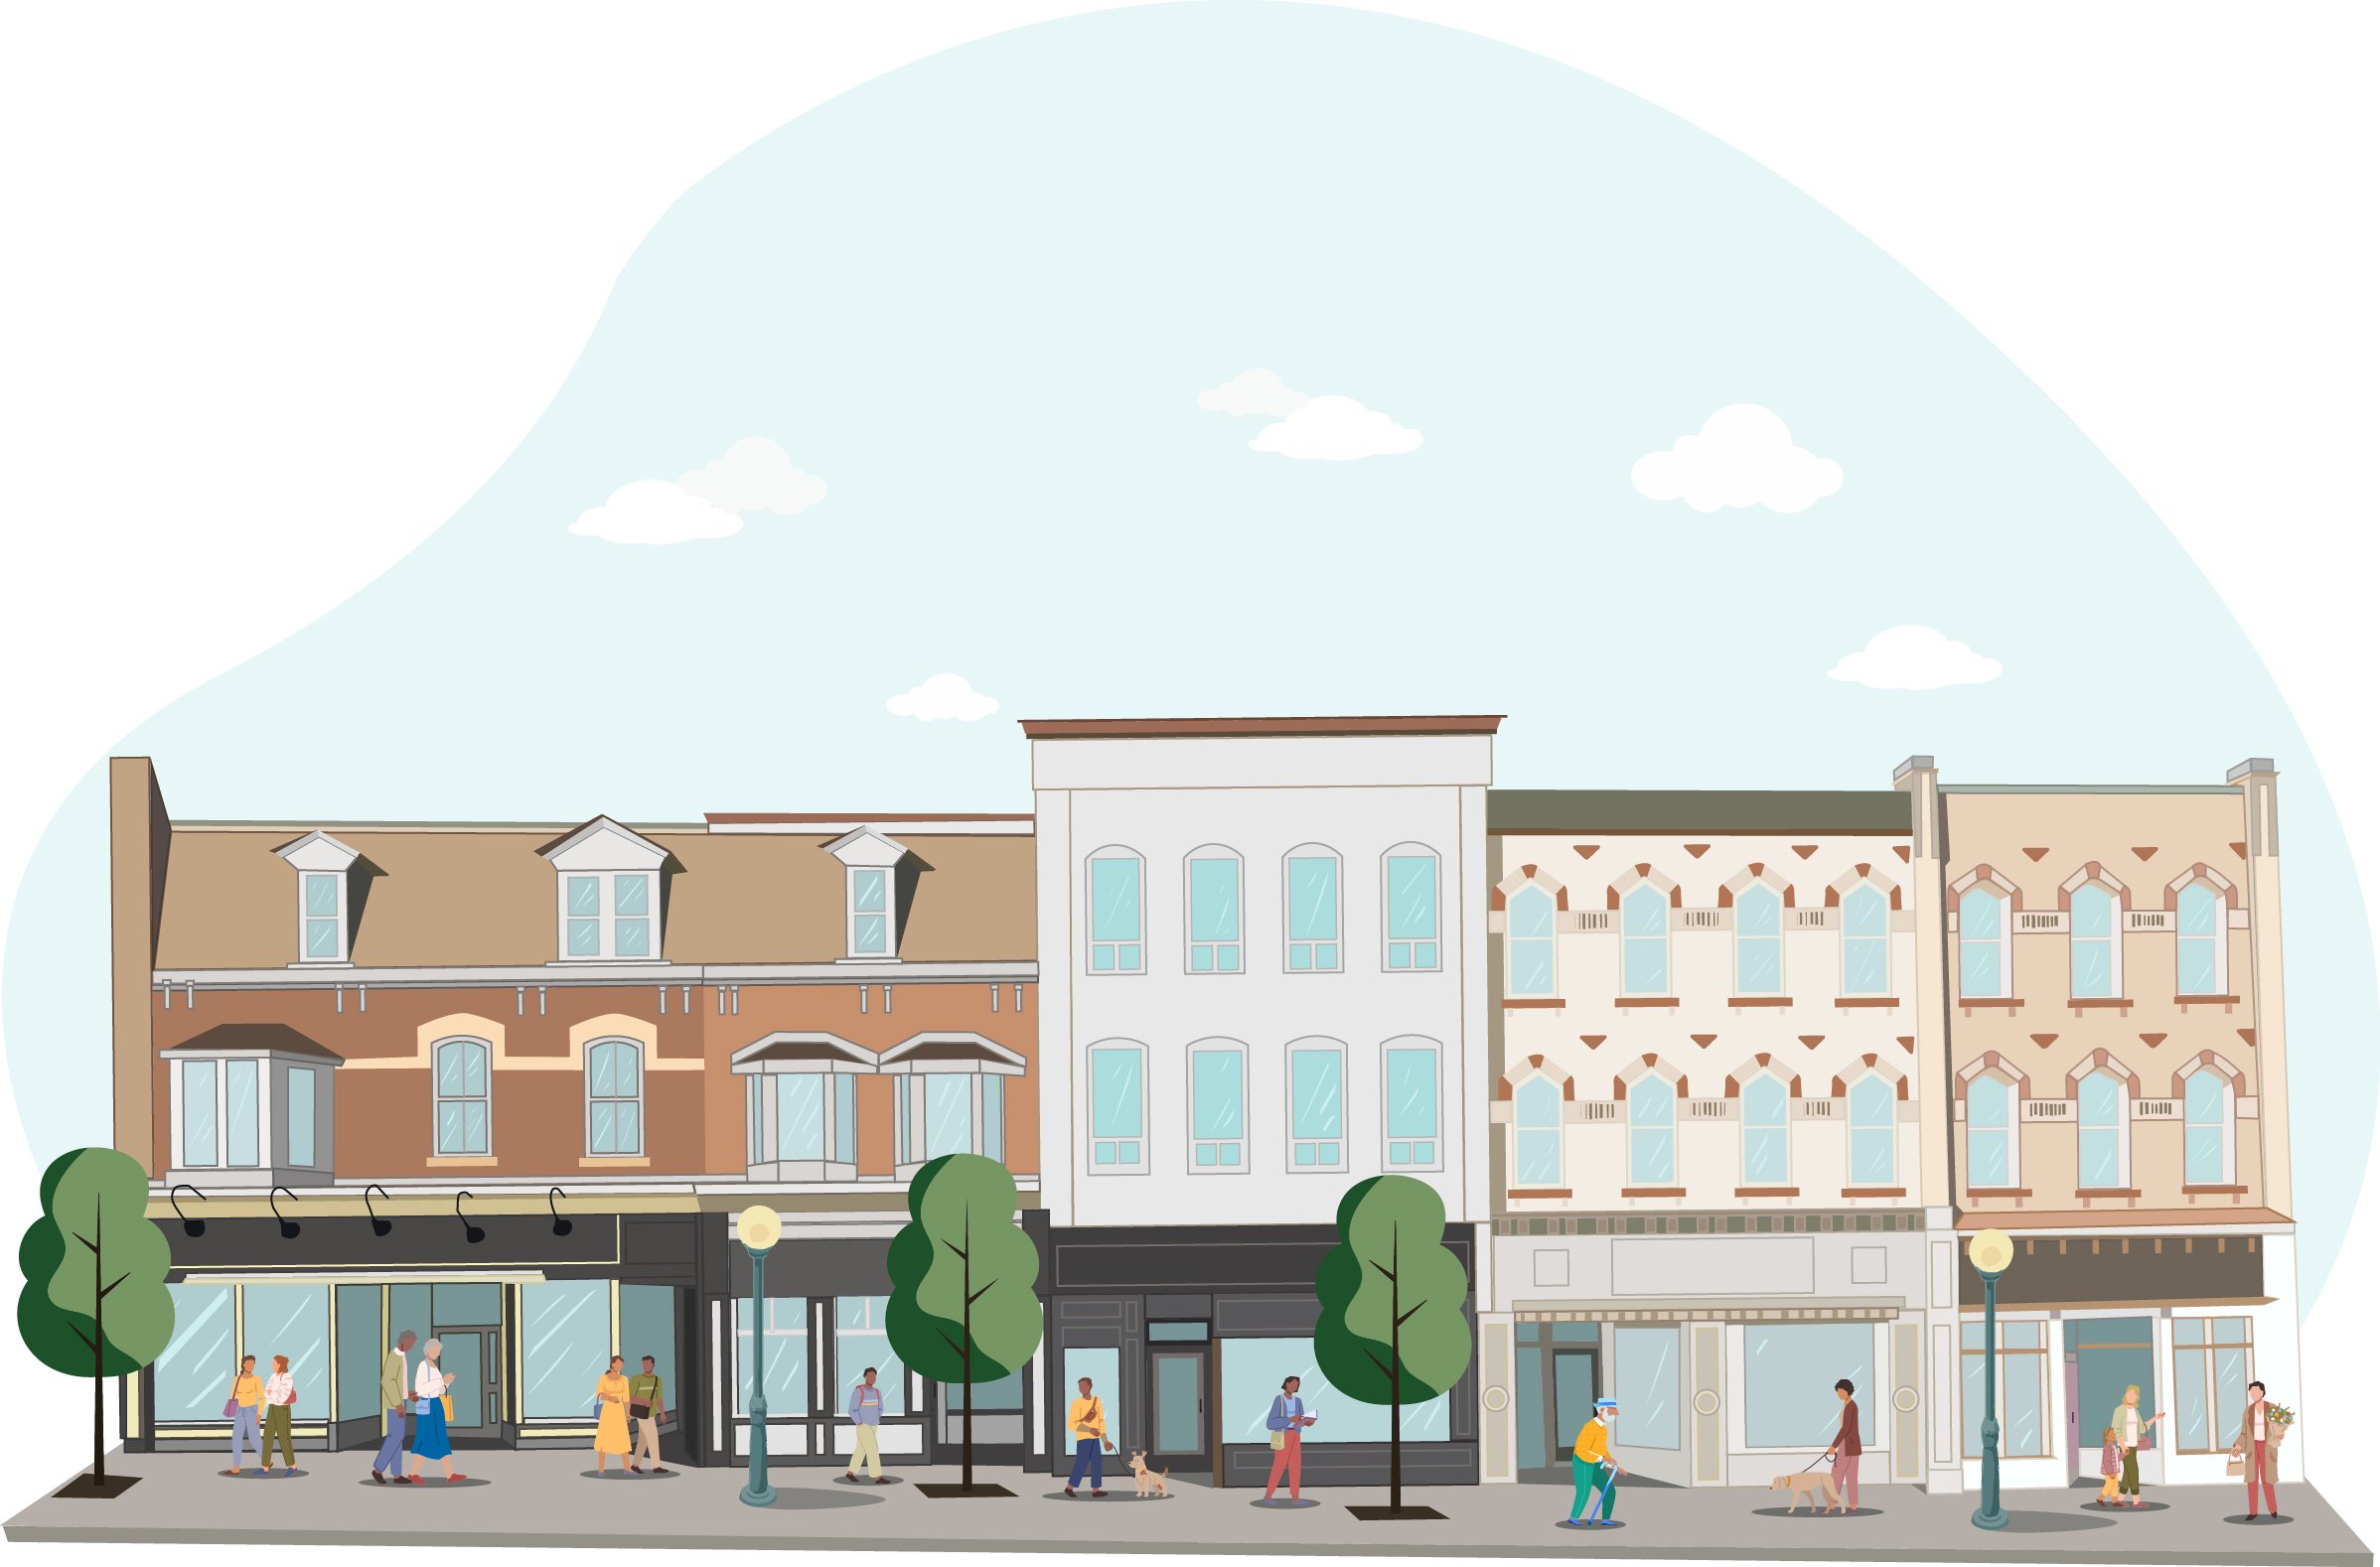 An illustration of several brick buildings, representing a part of downtown Orangeville